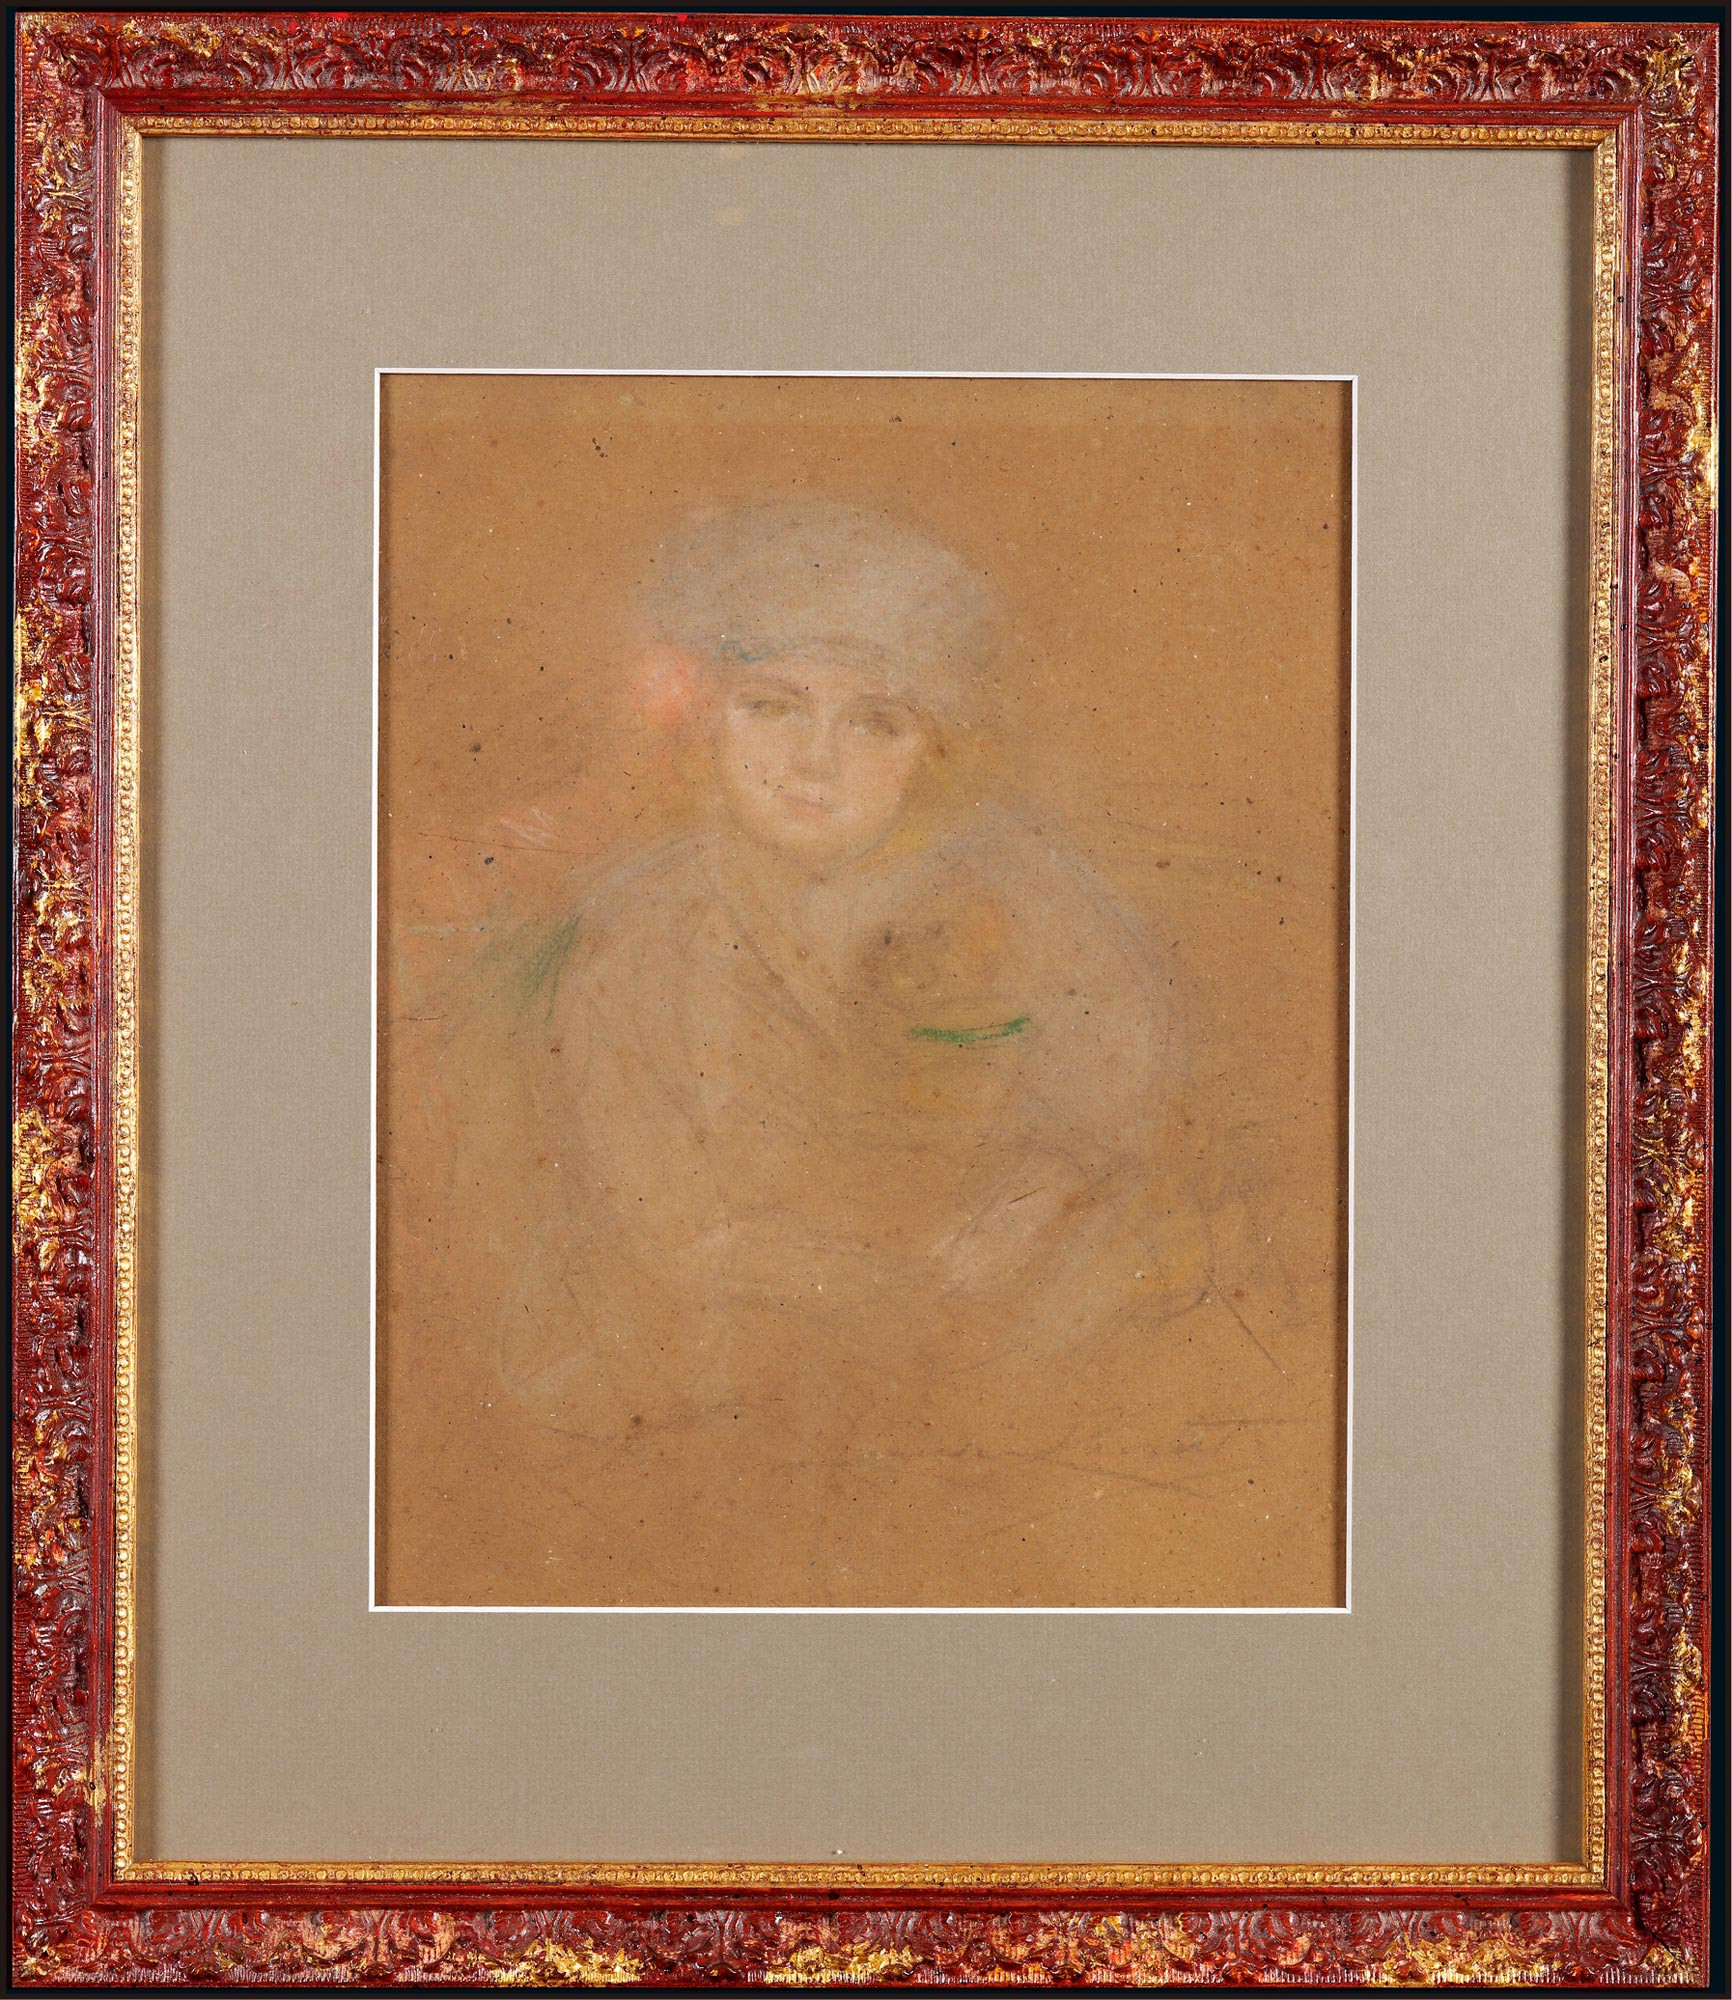 The “Portrait of a Woman” by Ernest Laurent, a famous French painter and mentor of Zhou Bichu, with a certificate